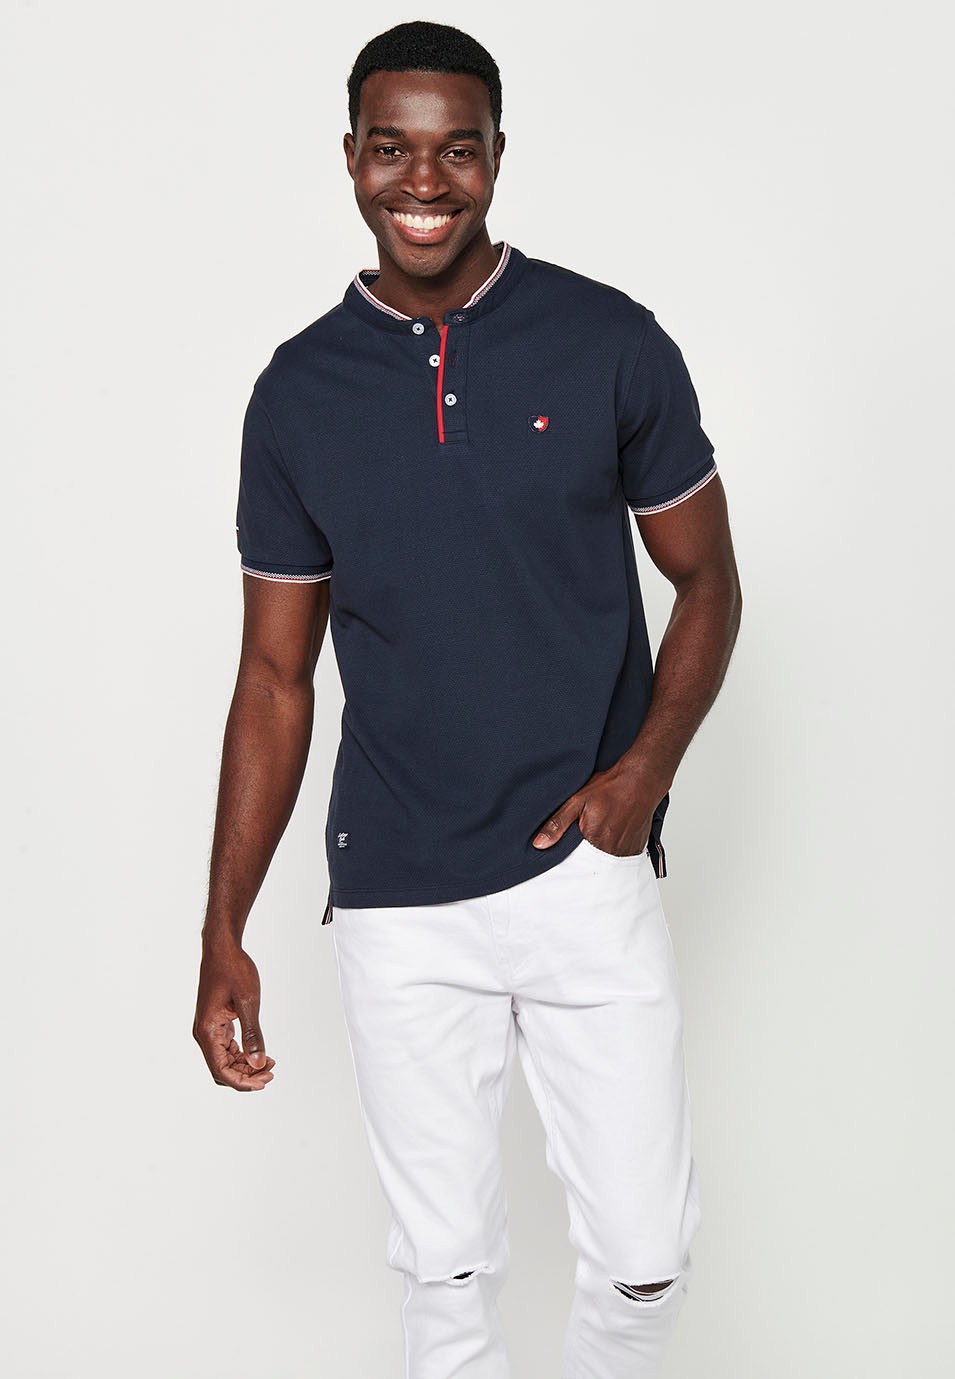 Short-sleeved cotton polo shirt with ribbed finish with round neck, buttoned opening and textured side slits in Navy Color for Men